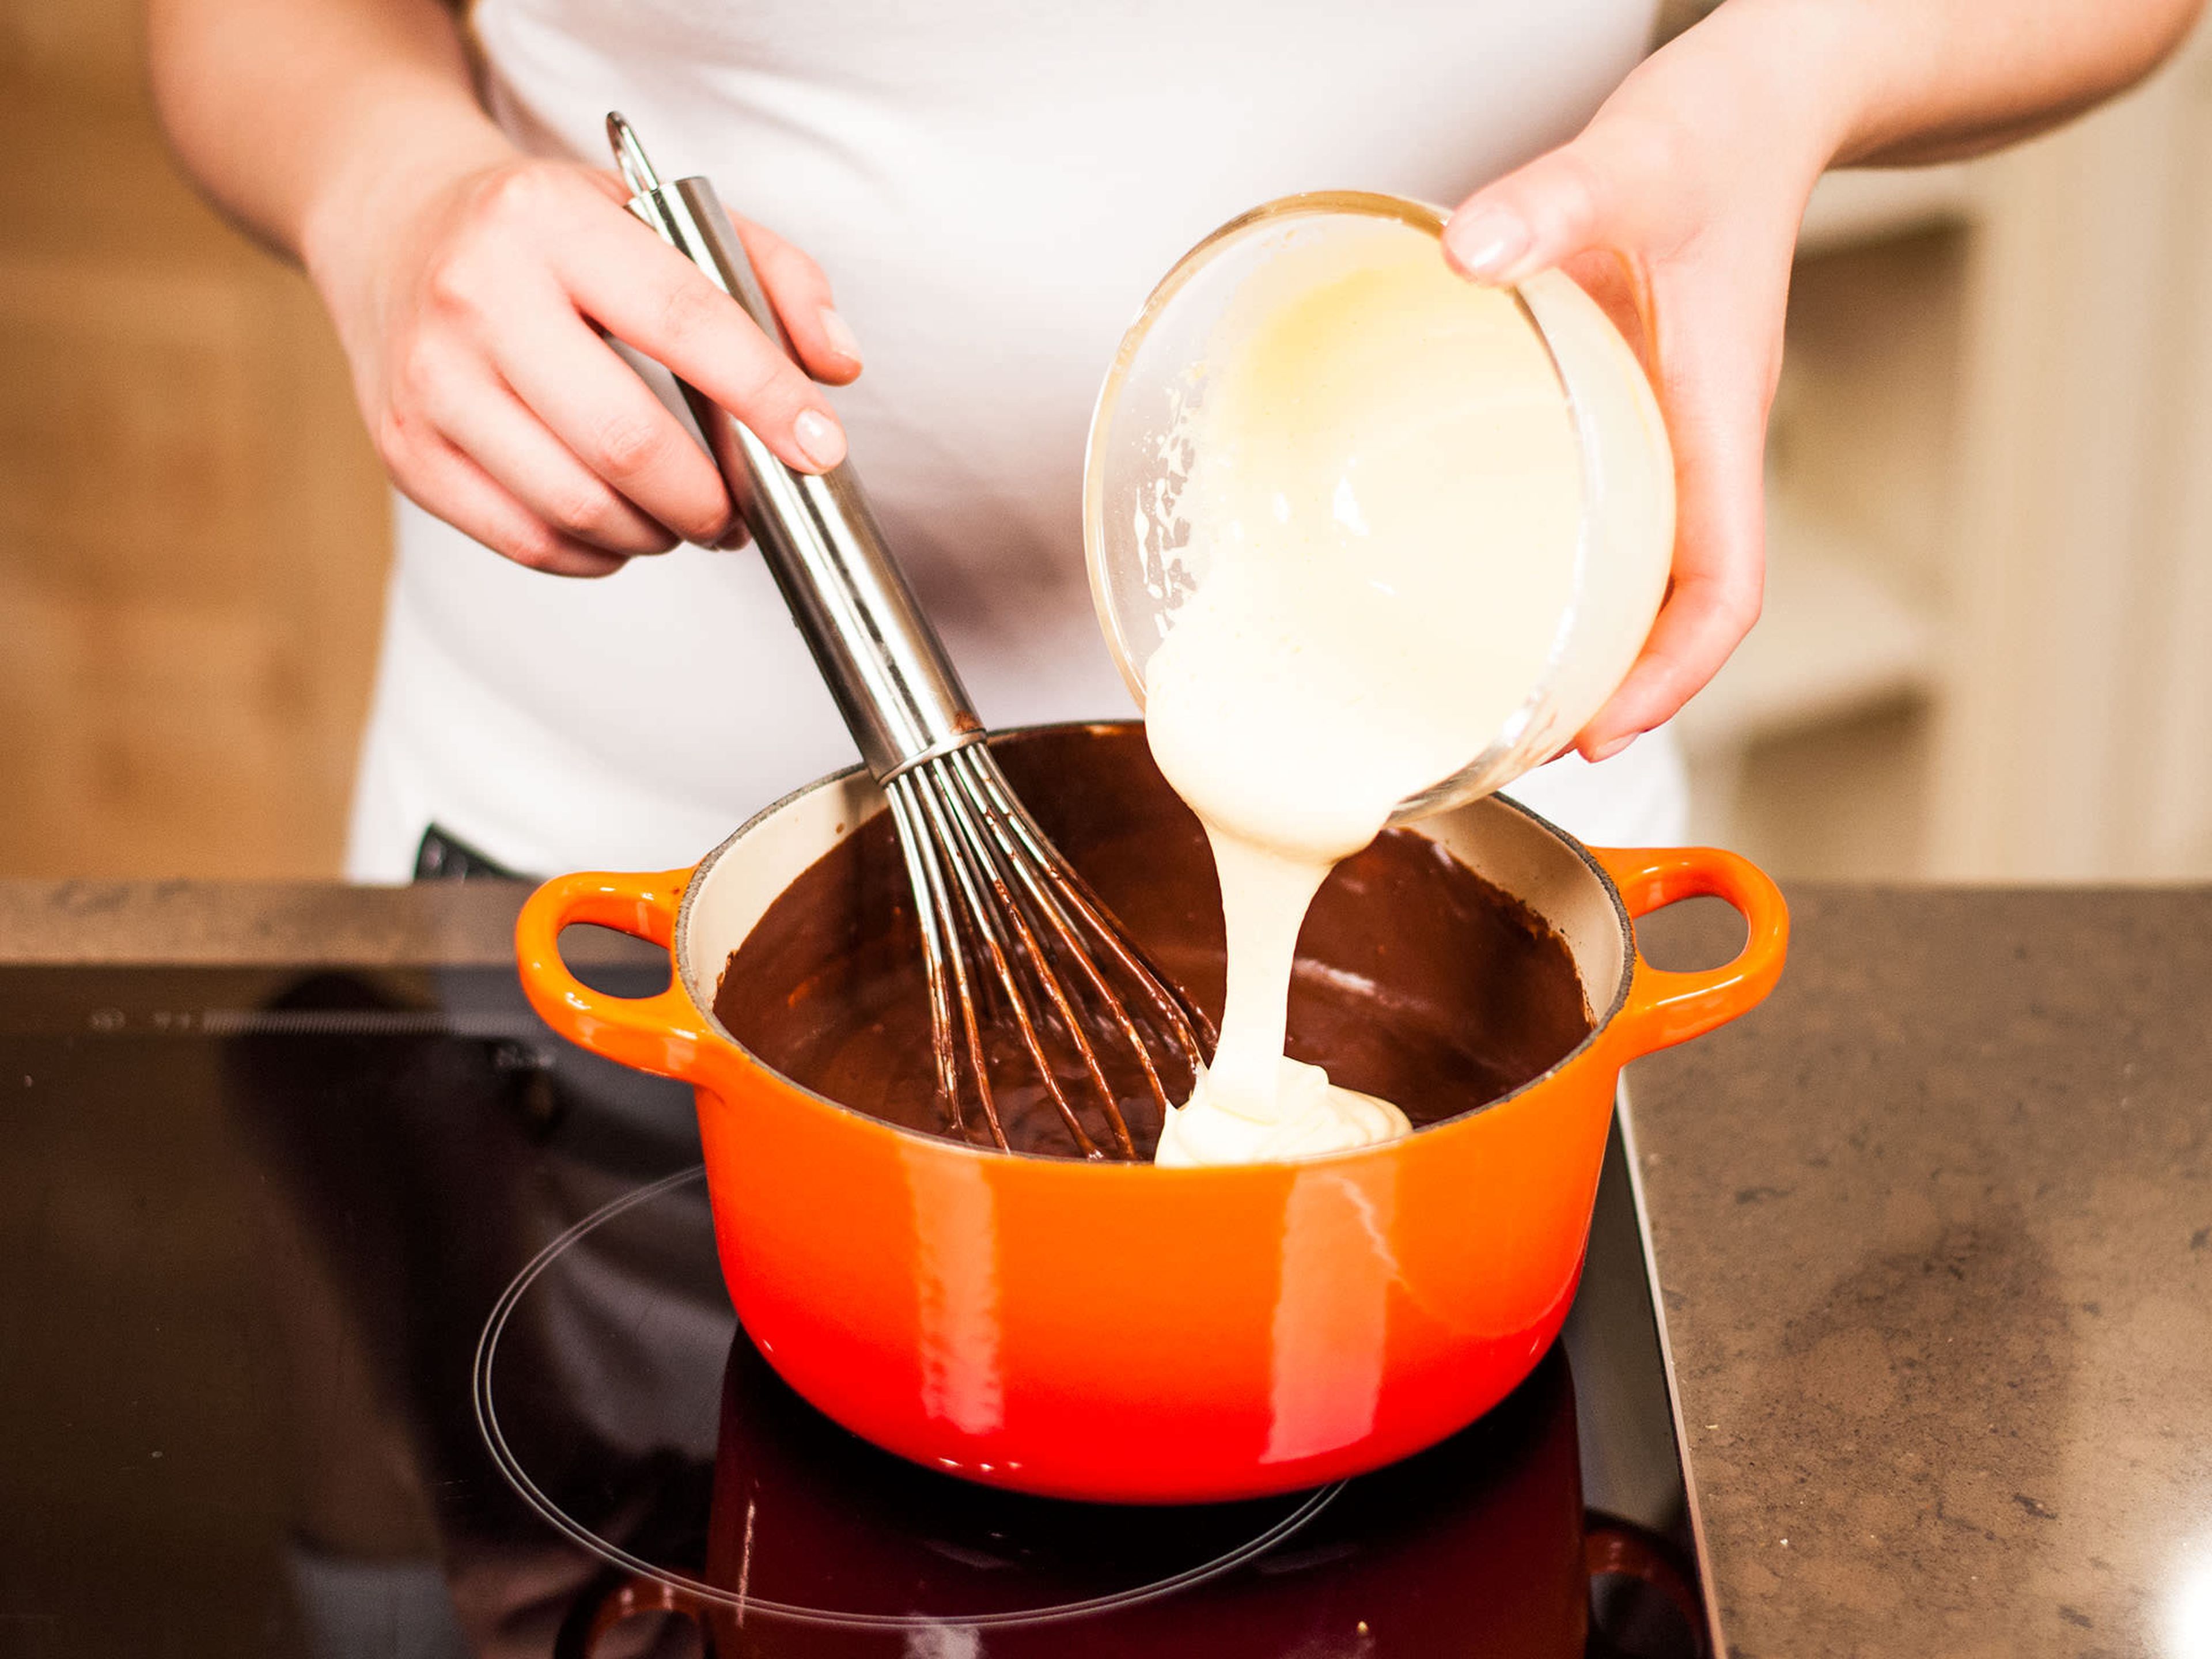 Beat sugar and egg yolks with a hand mixer until fluffy and pale. Fold immediately in the pudding. Fill in serving dishes and serve warm or cold.